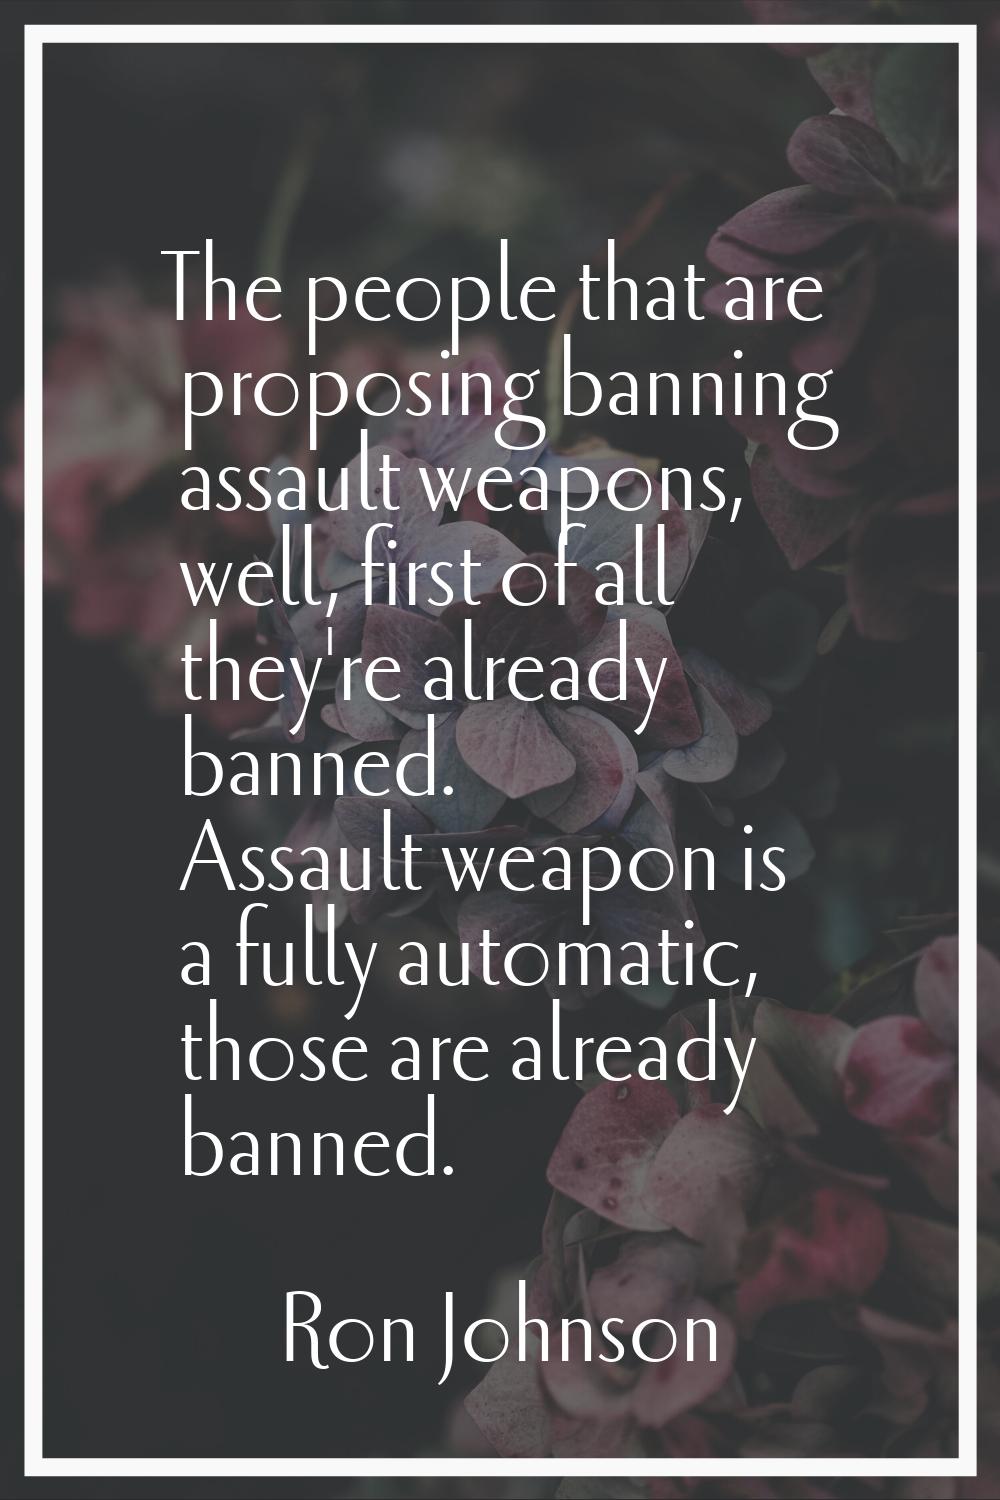 The people that are proposing banning assault weapons, well, first of all they're already banned. A